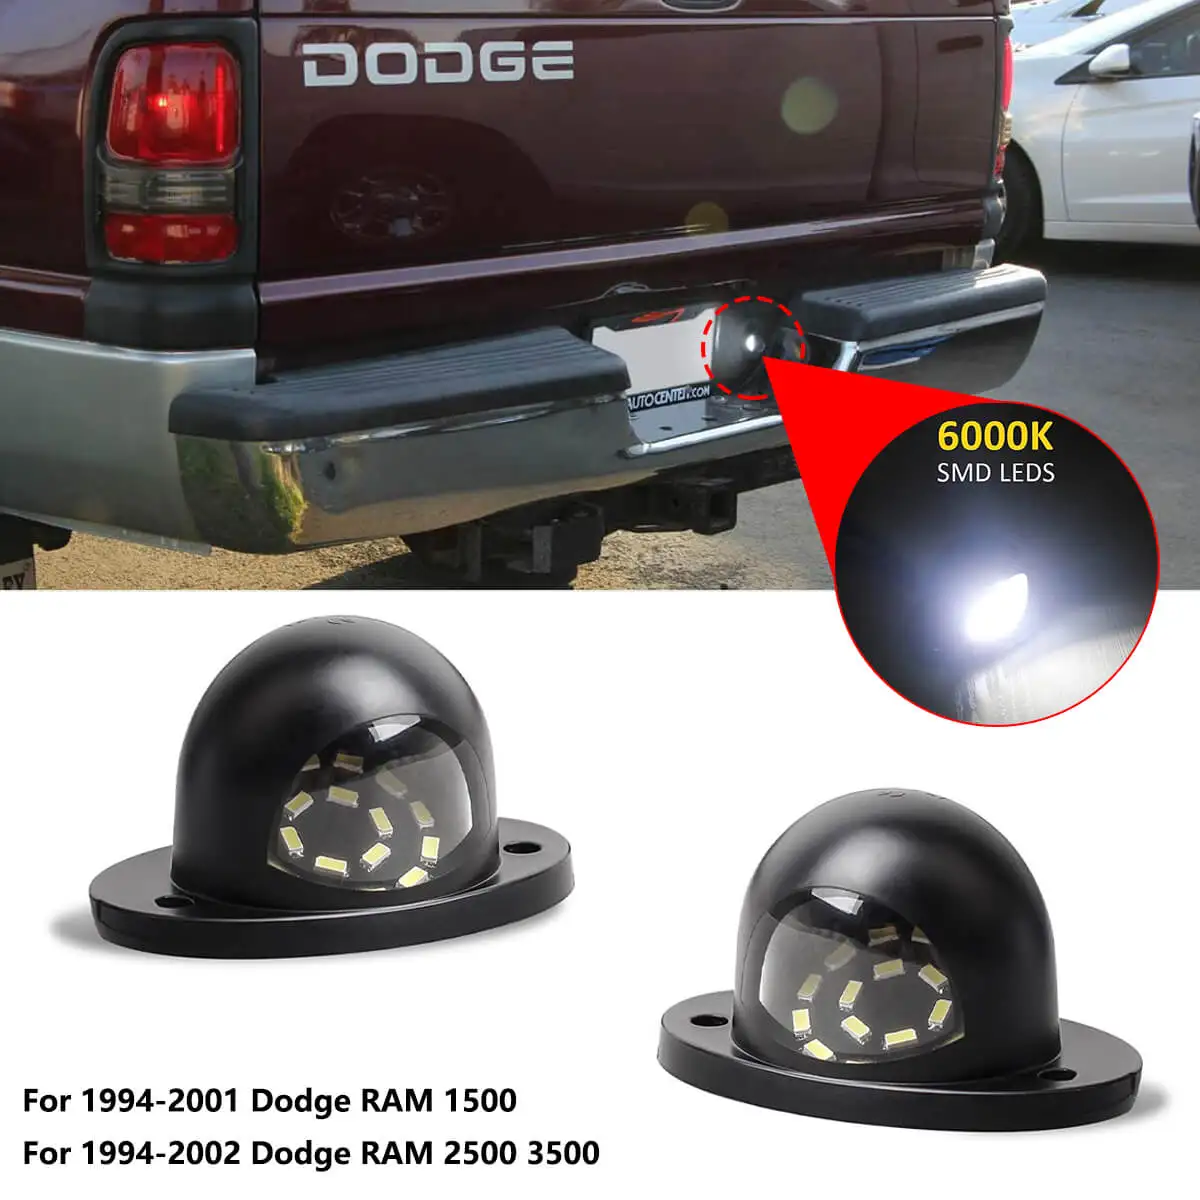 

LED License Plate Light Tag lights For 1994 to 2001 Dodge RAM 1500 & 1994 to 2002 RAM 2500 3500 Pickup 6000K White Pack of 2